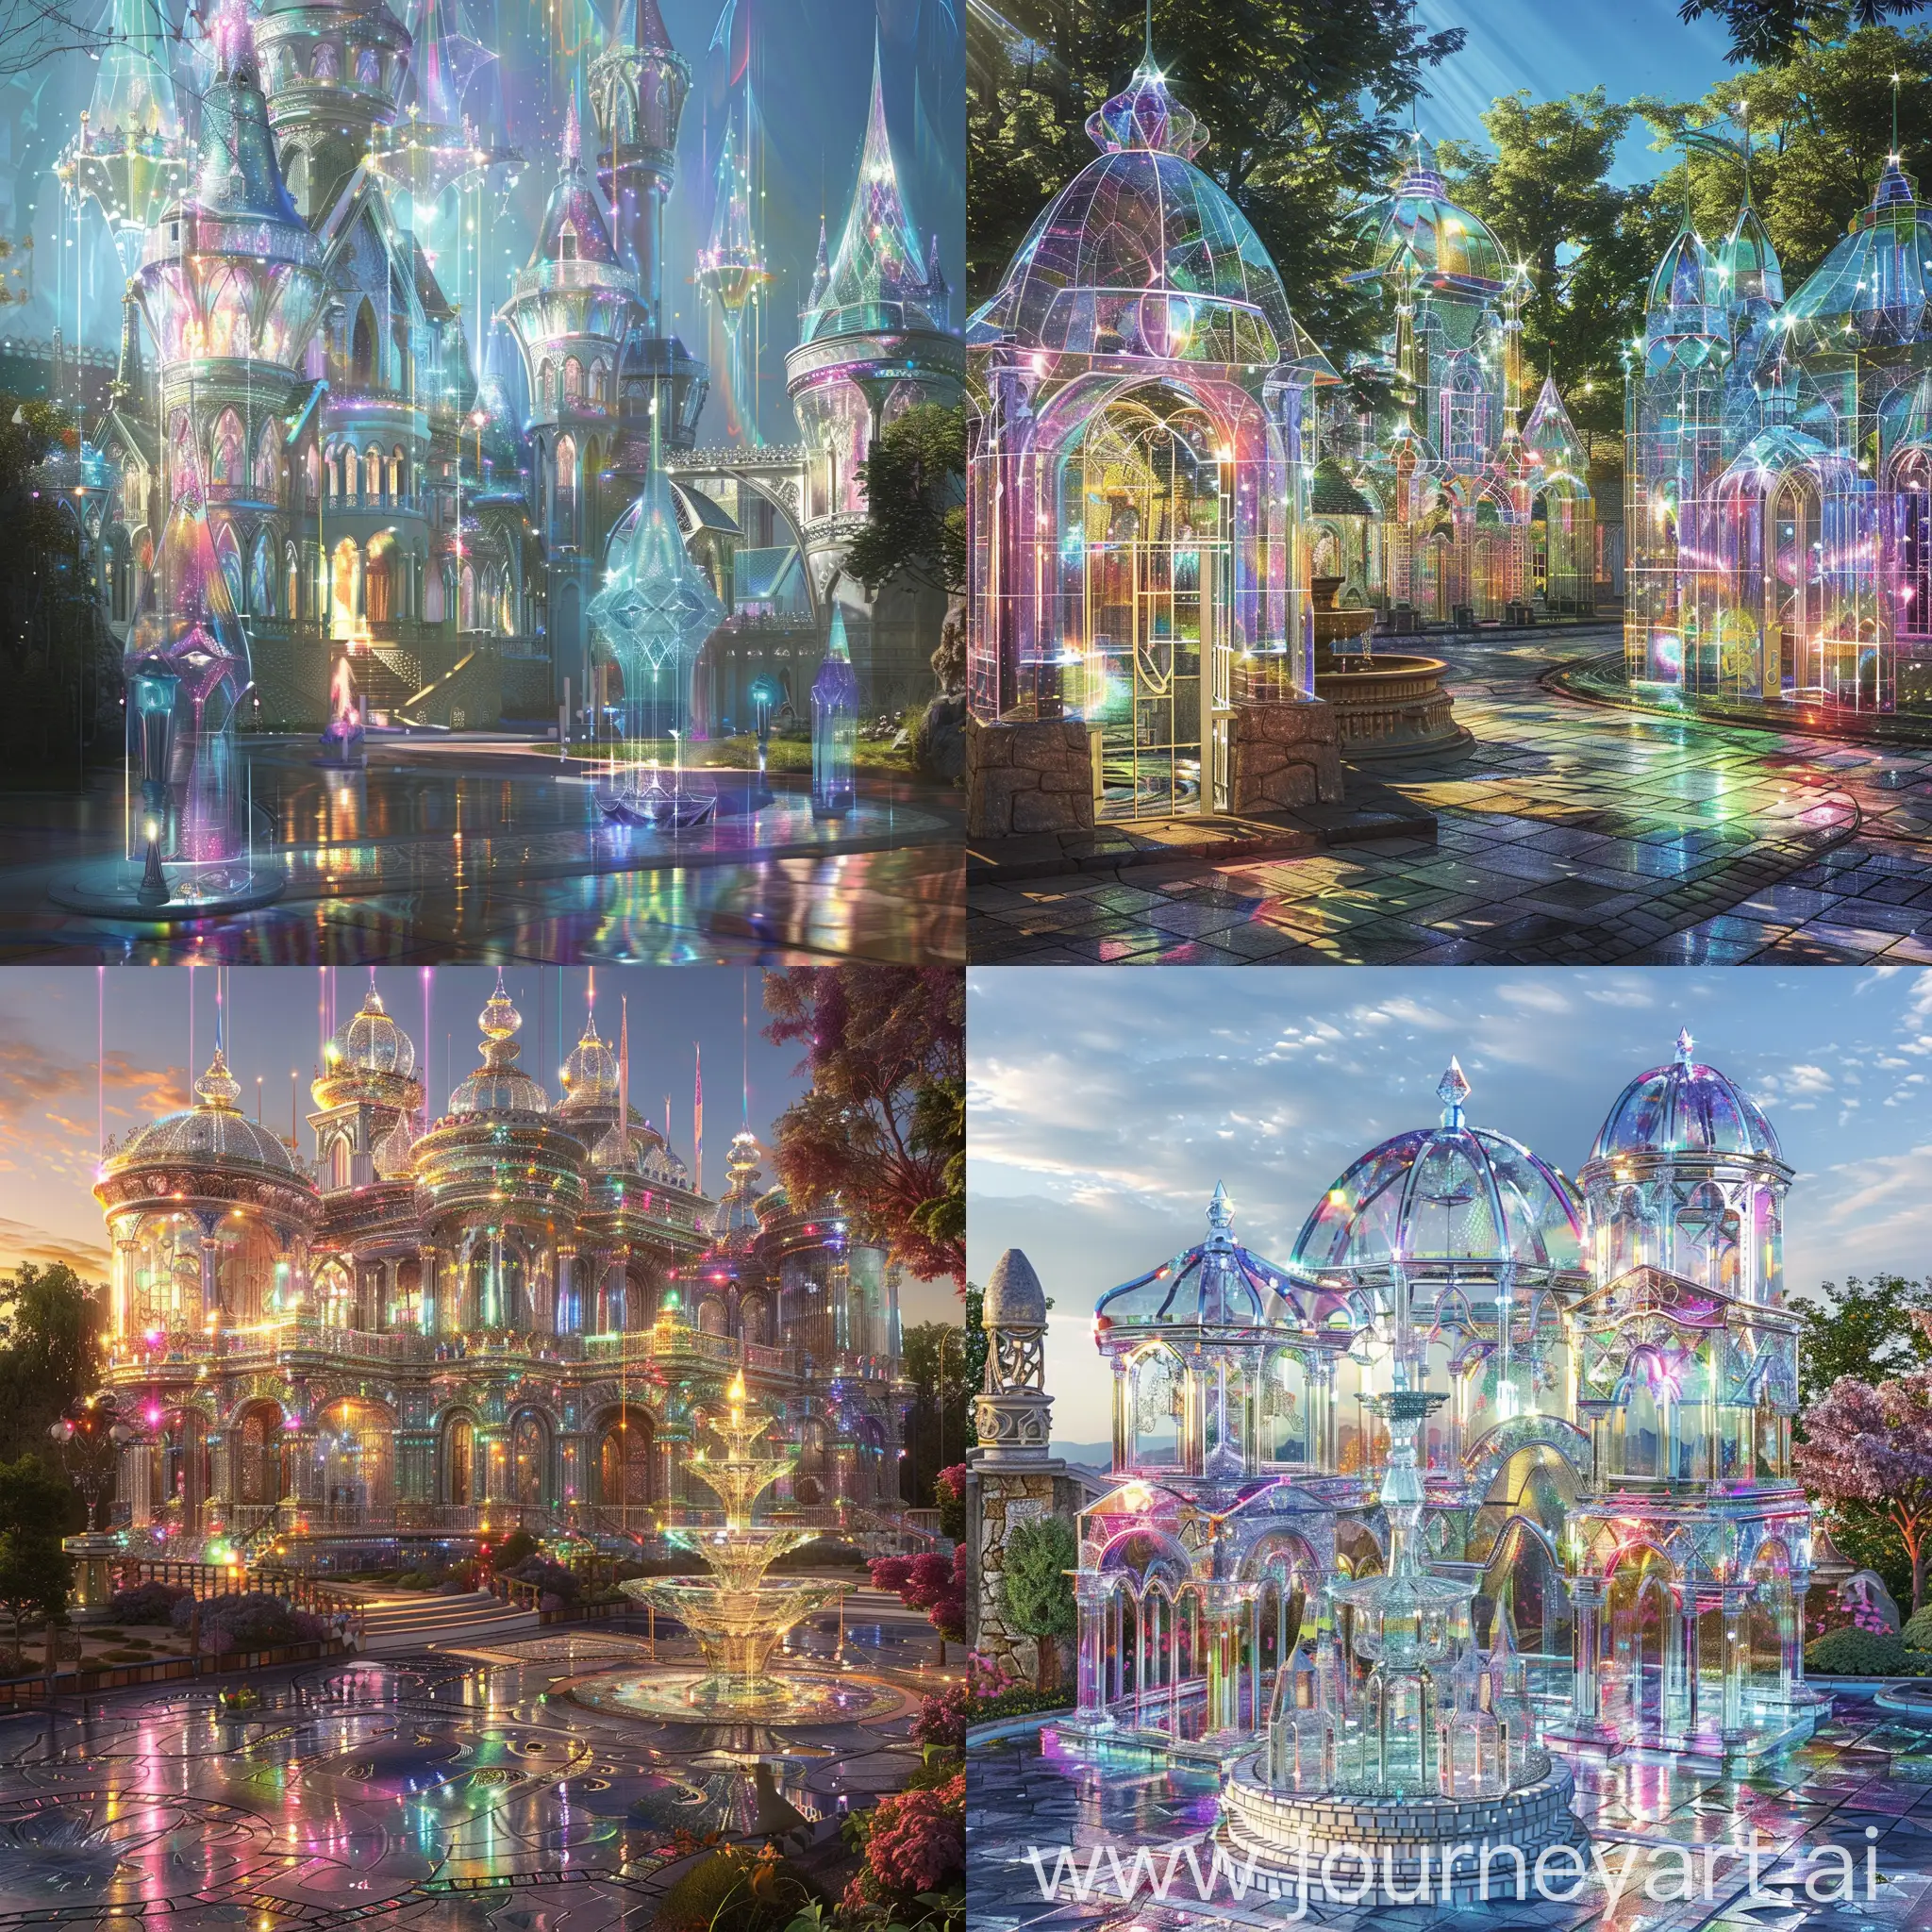 The architecture of the fairy kingdom resembles elegant filigree decorations. Houses and palaces are built from transparent crystals, in which light plays, creating captivating rainbow reflections. Every corner of the kingdom - be it a square with a fountain or a hidden meadow - shines with the light of magic, revealing before the eyes of visitors all the charm of the fairy world.